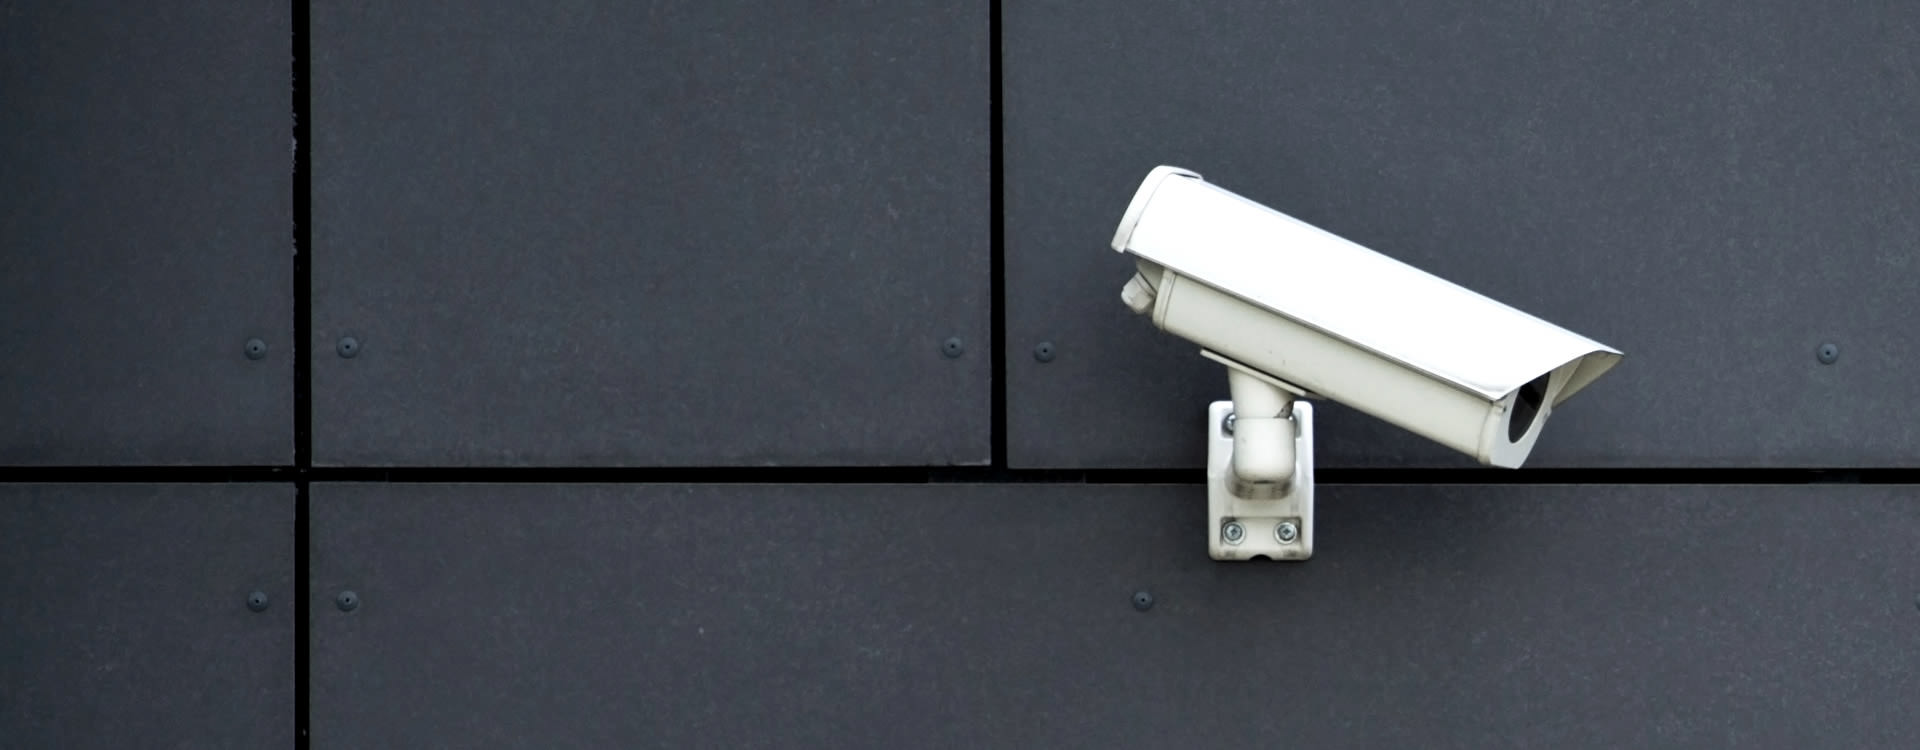 Why you should install the security system in your home?